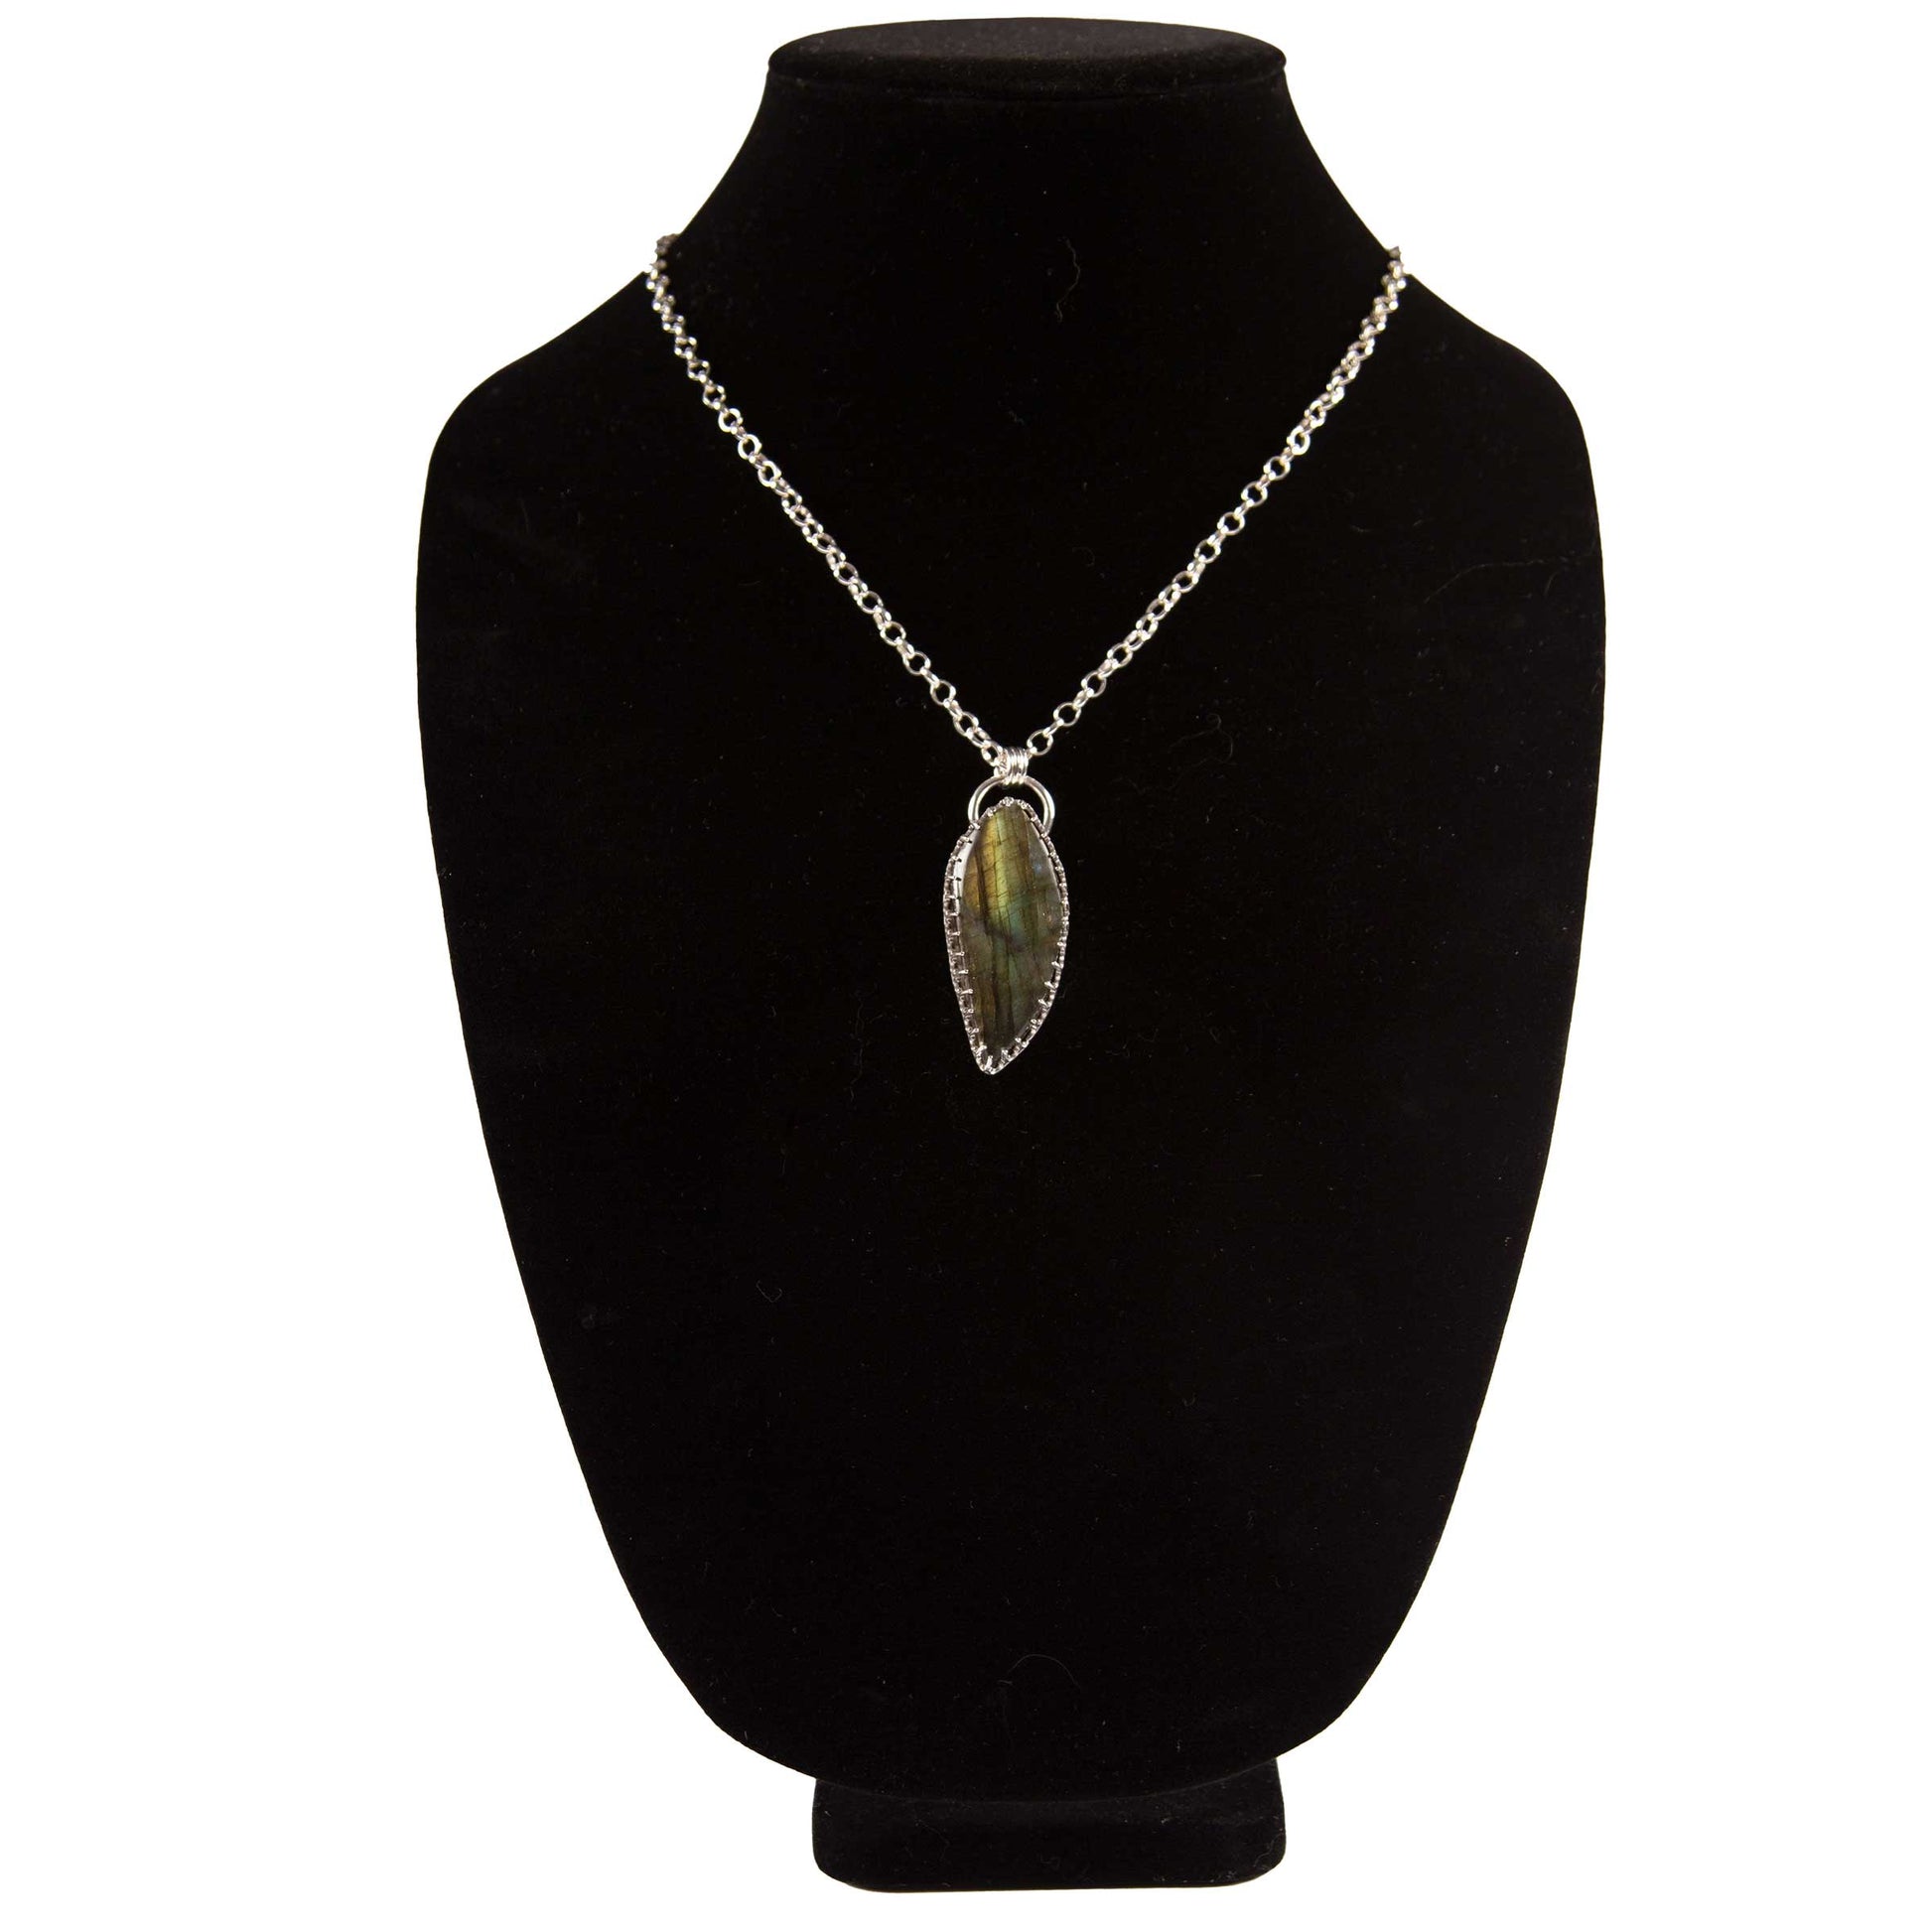 Large, deep cut, labradorite stone, fine silver bezel, sterling silver textured back,  sterling silver 20-inch Rolo chain with clasp,  Labradorite, Pendant, 2.25" x .75"